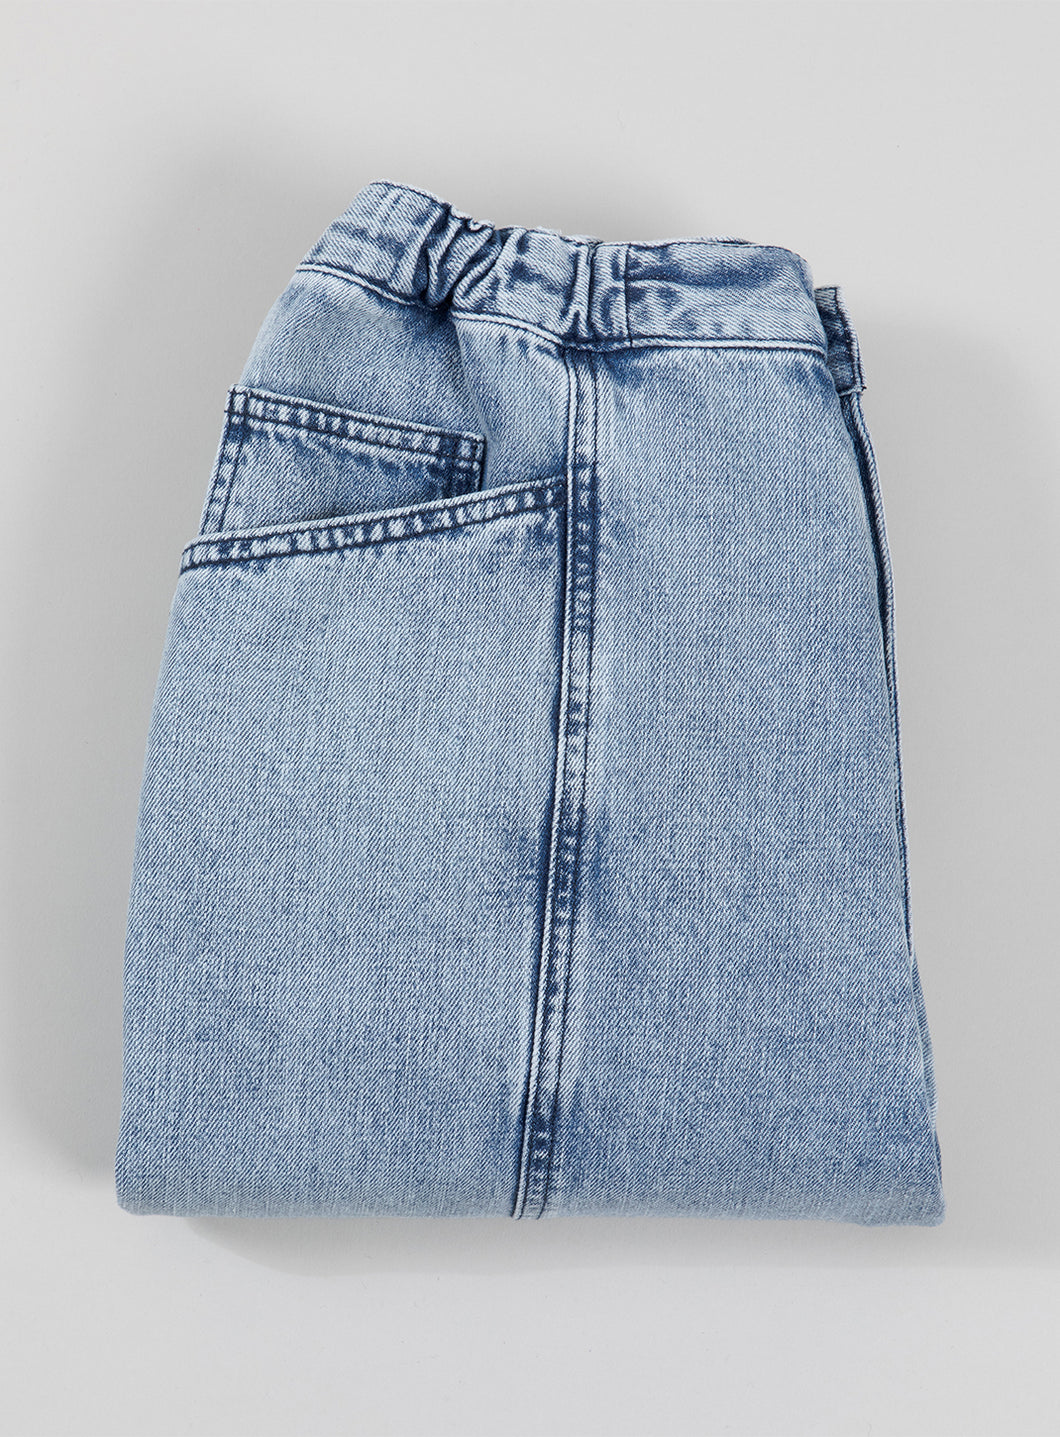 5 Pockets Pants with Front Cuts in Bleach Denim